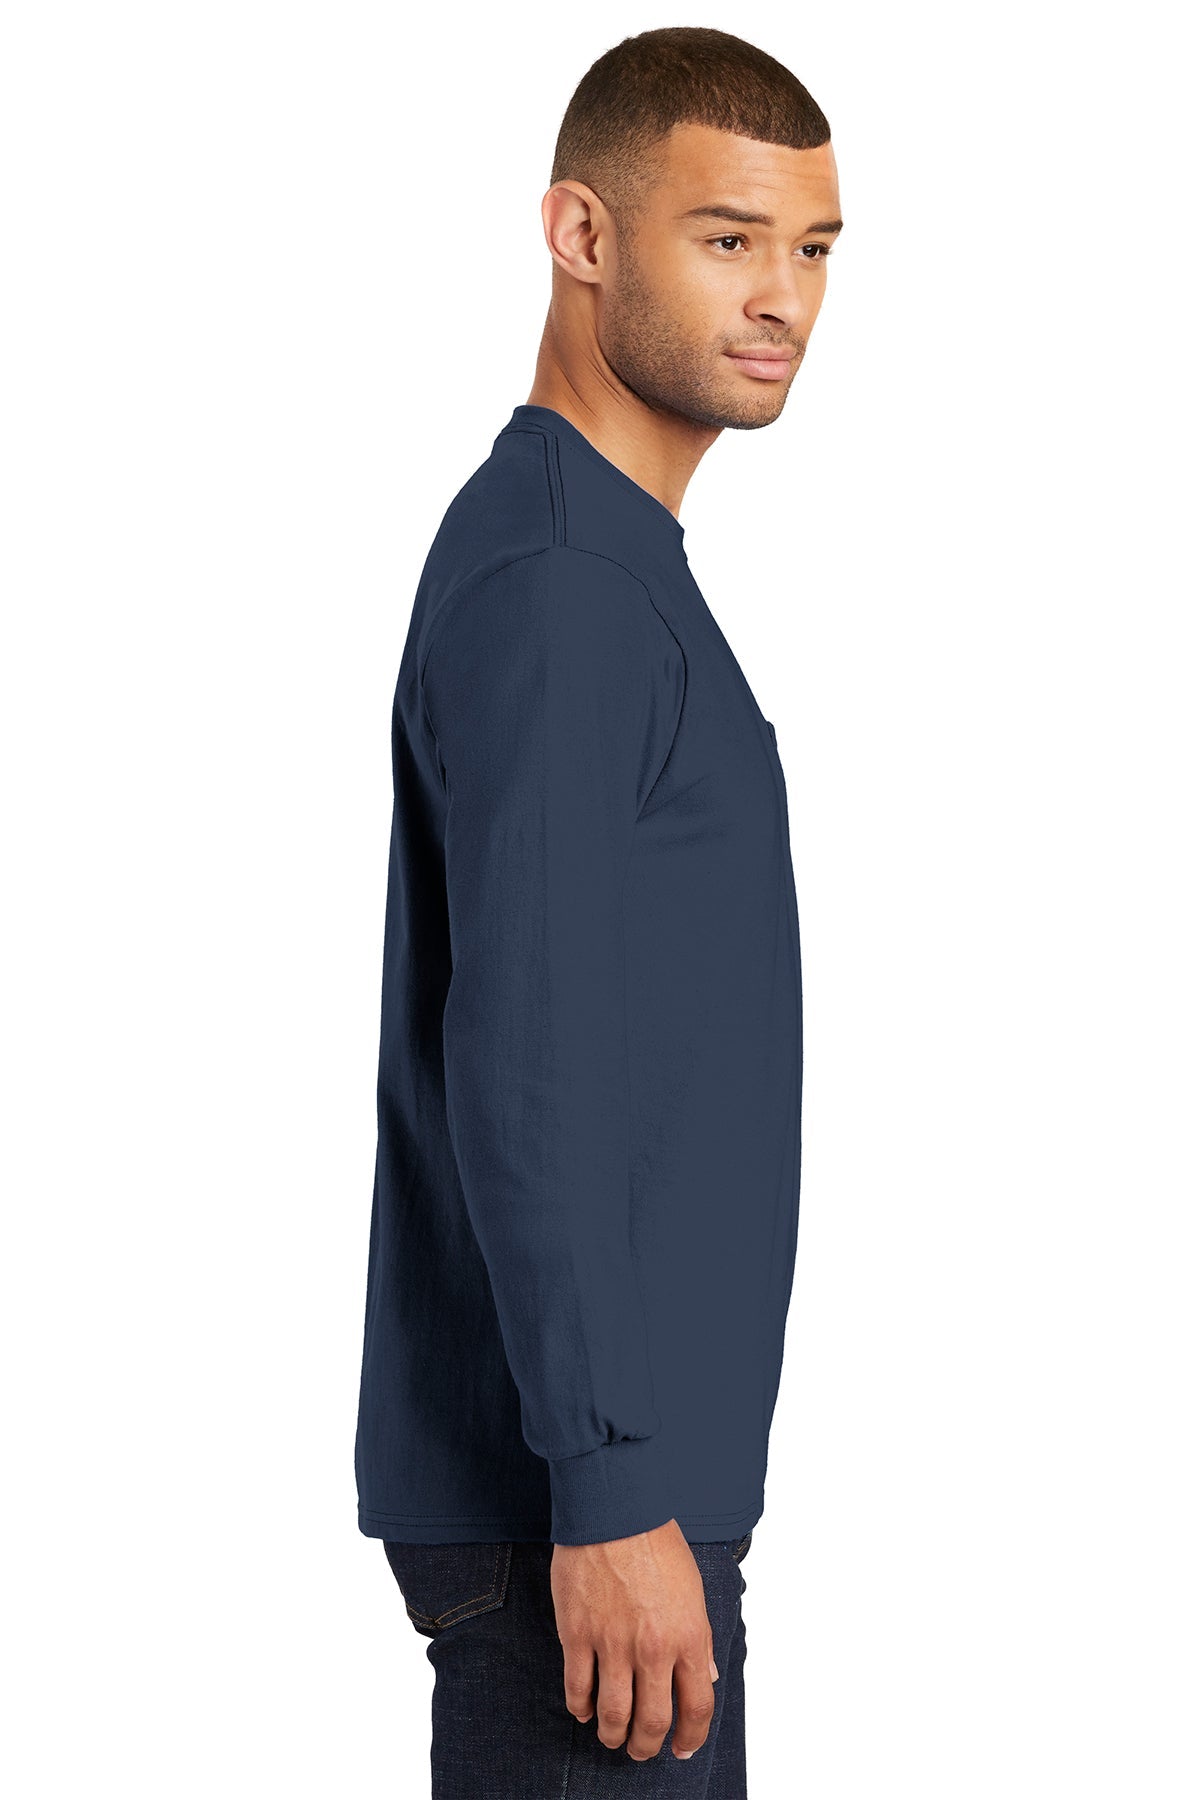 Port & Company Tall Long Sleeve Branded Essential Pocket Tee's, Navy